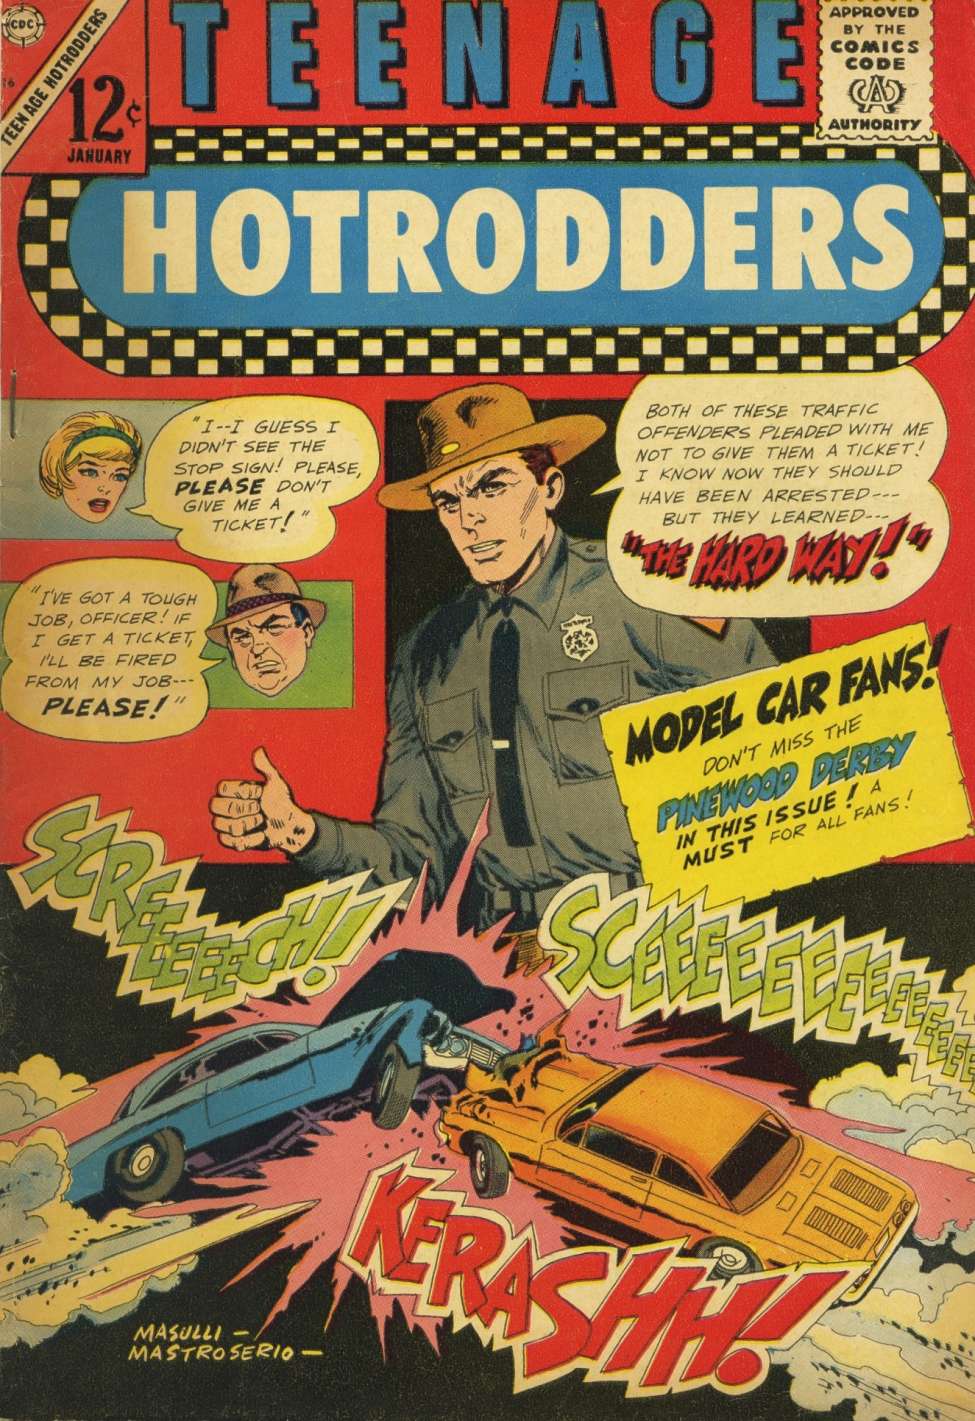 Comic Book Cover For Teenage Hotrodders 16